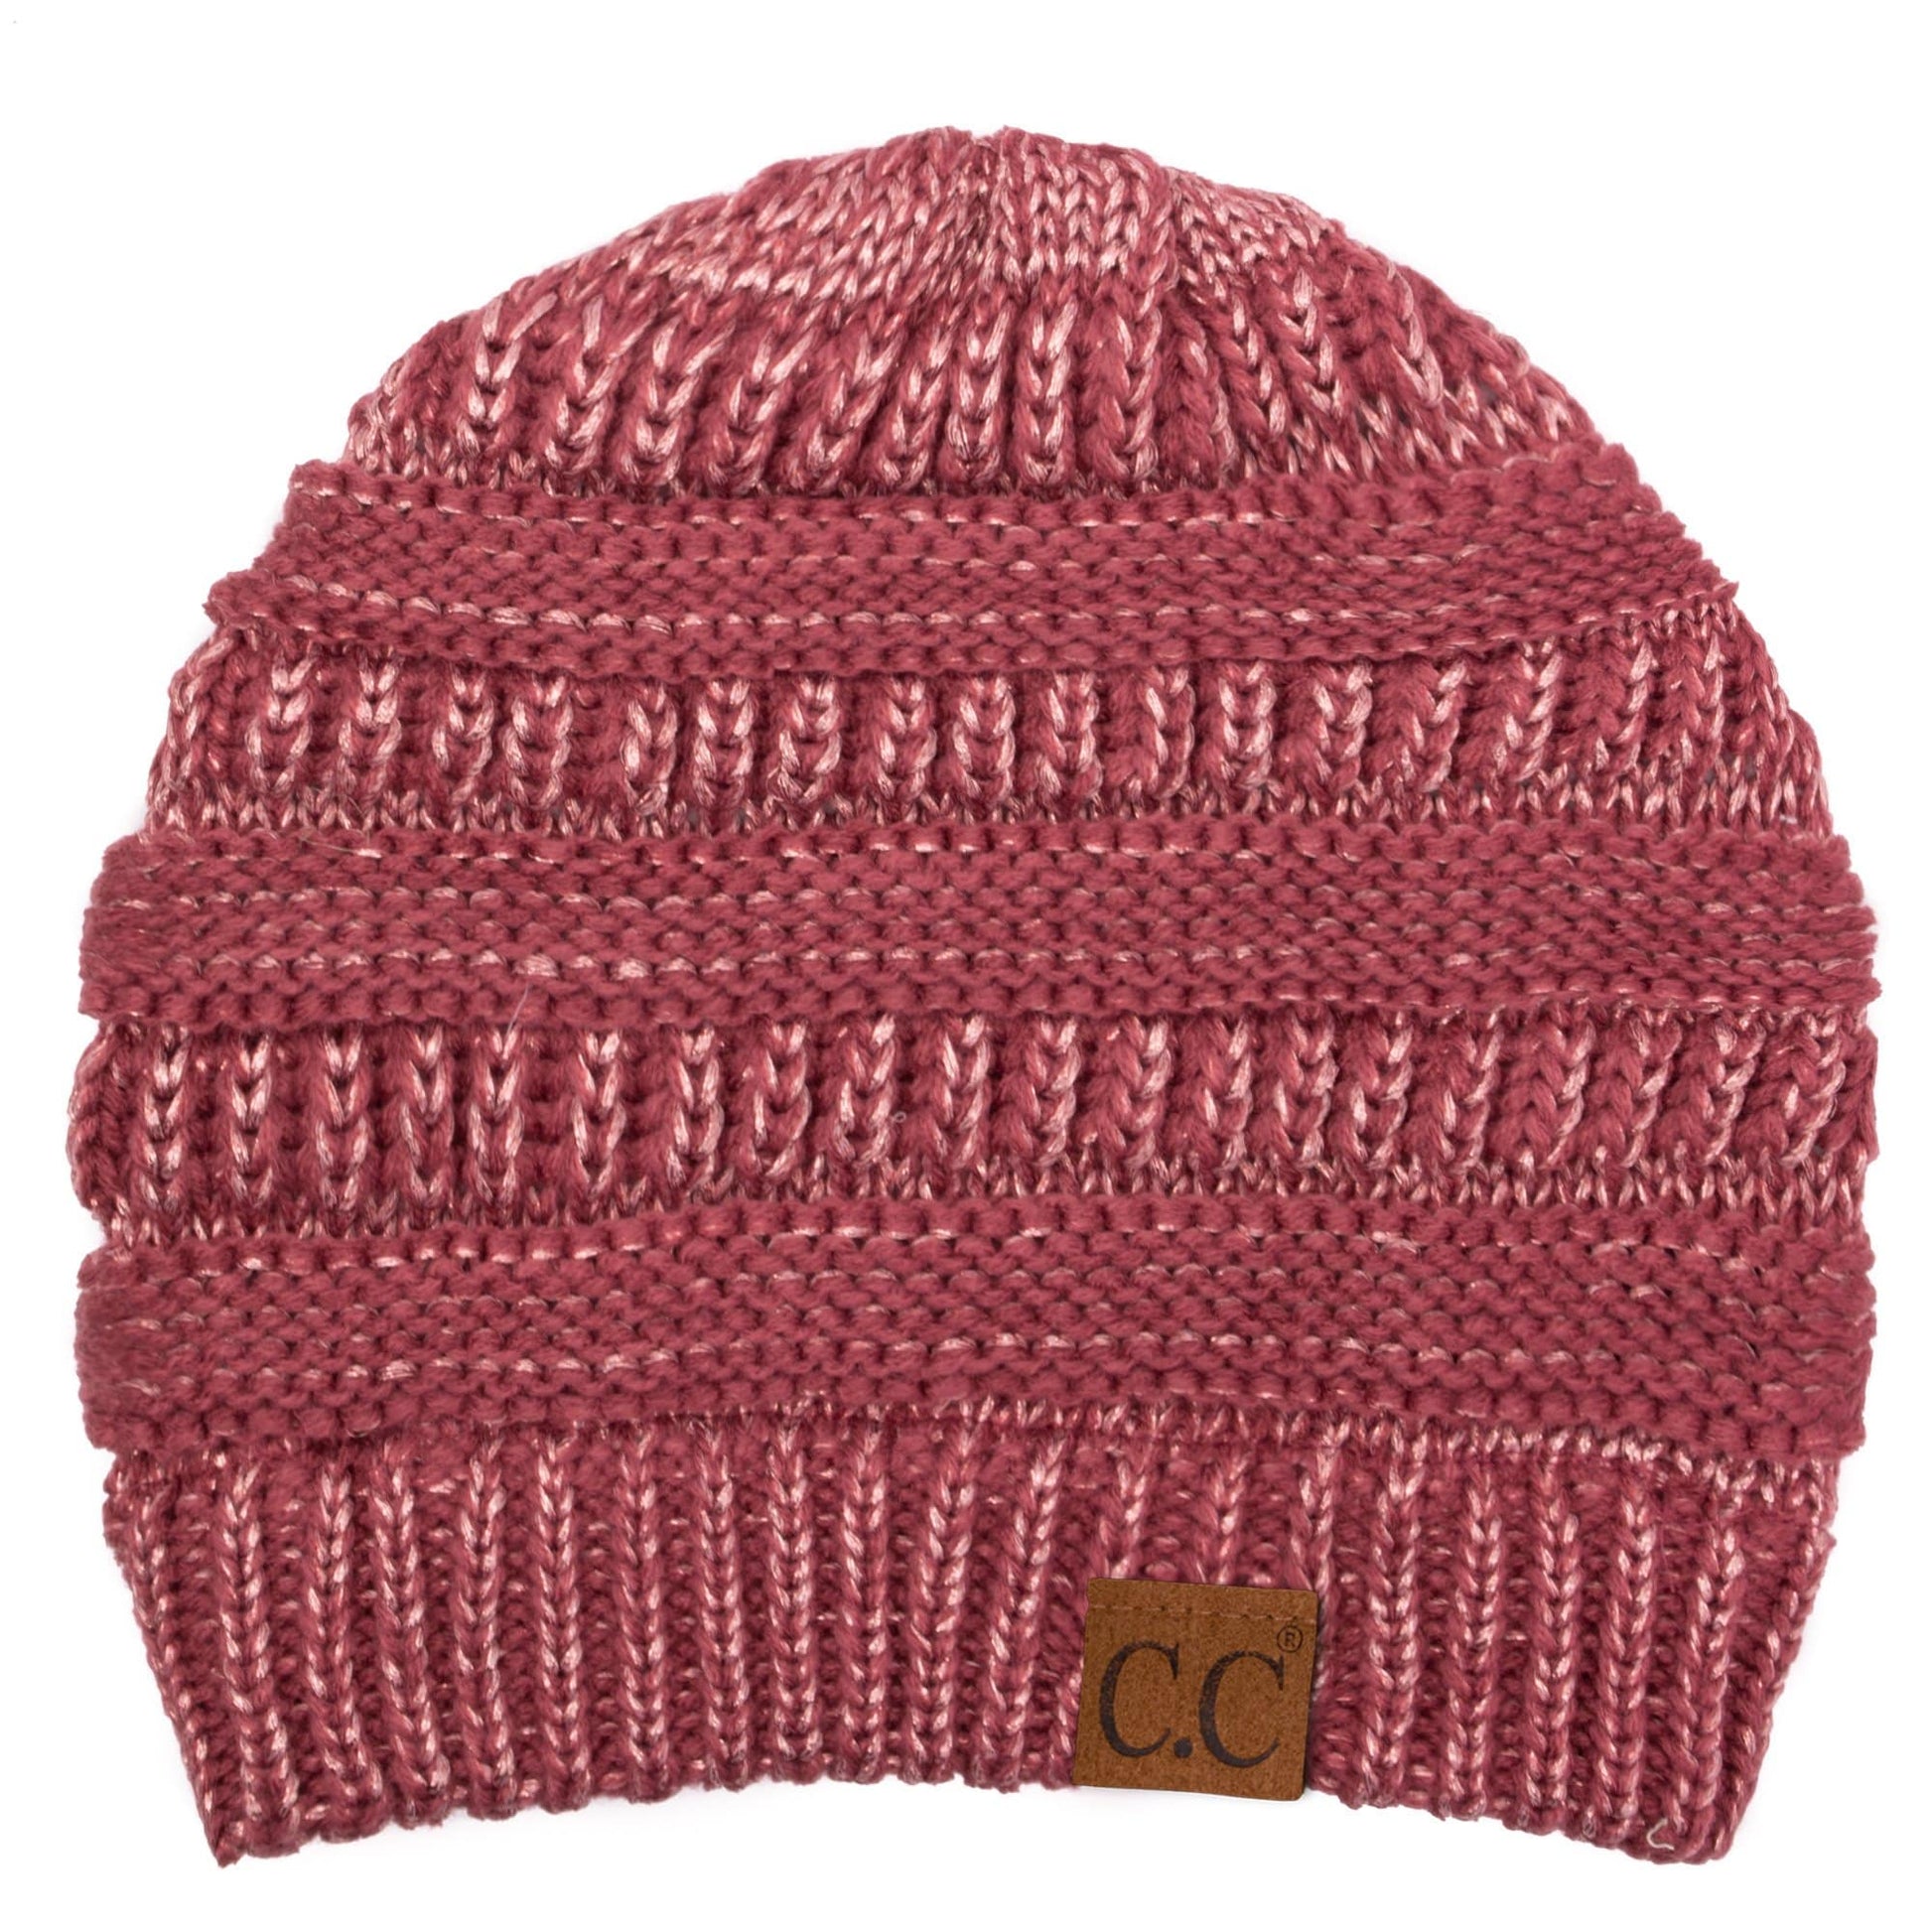 C.C Apparel Dark Rose C.C Hat 20AM - Slouchy Thick Warm Cap Hat Skully Metallic Cable Knit Beanie